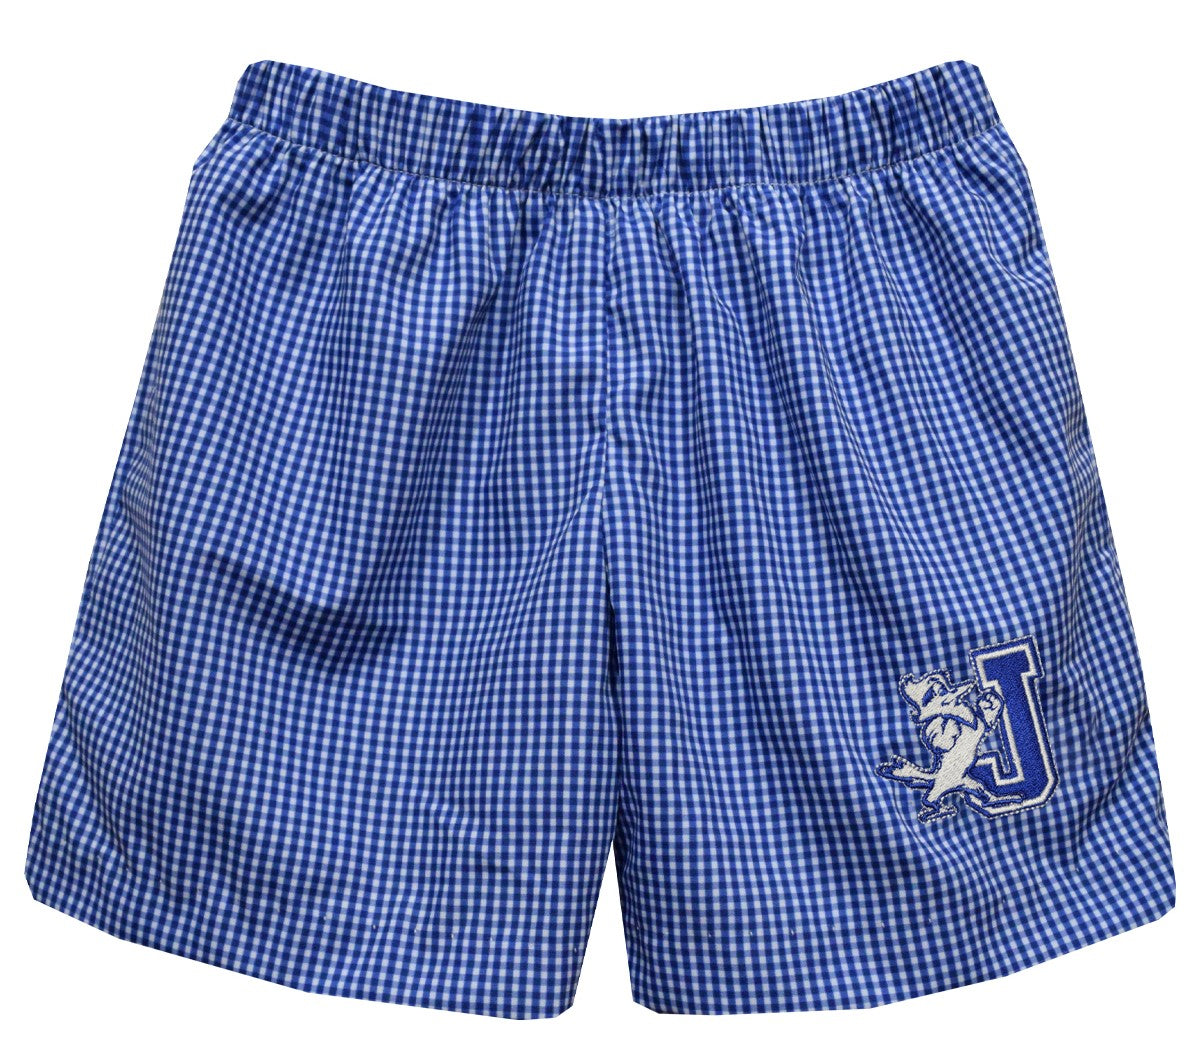 Vive La Fete.  55% Polyester/45% Cotton.  Machine Wash.  Embroidered J/Jayson Logo.  This boy's classic pull-on elastic waist short will show off his Blue Jay Spirit!